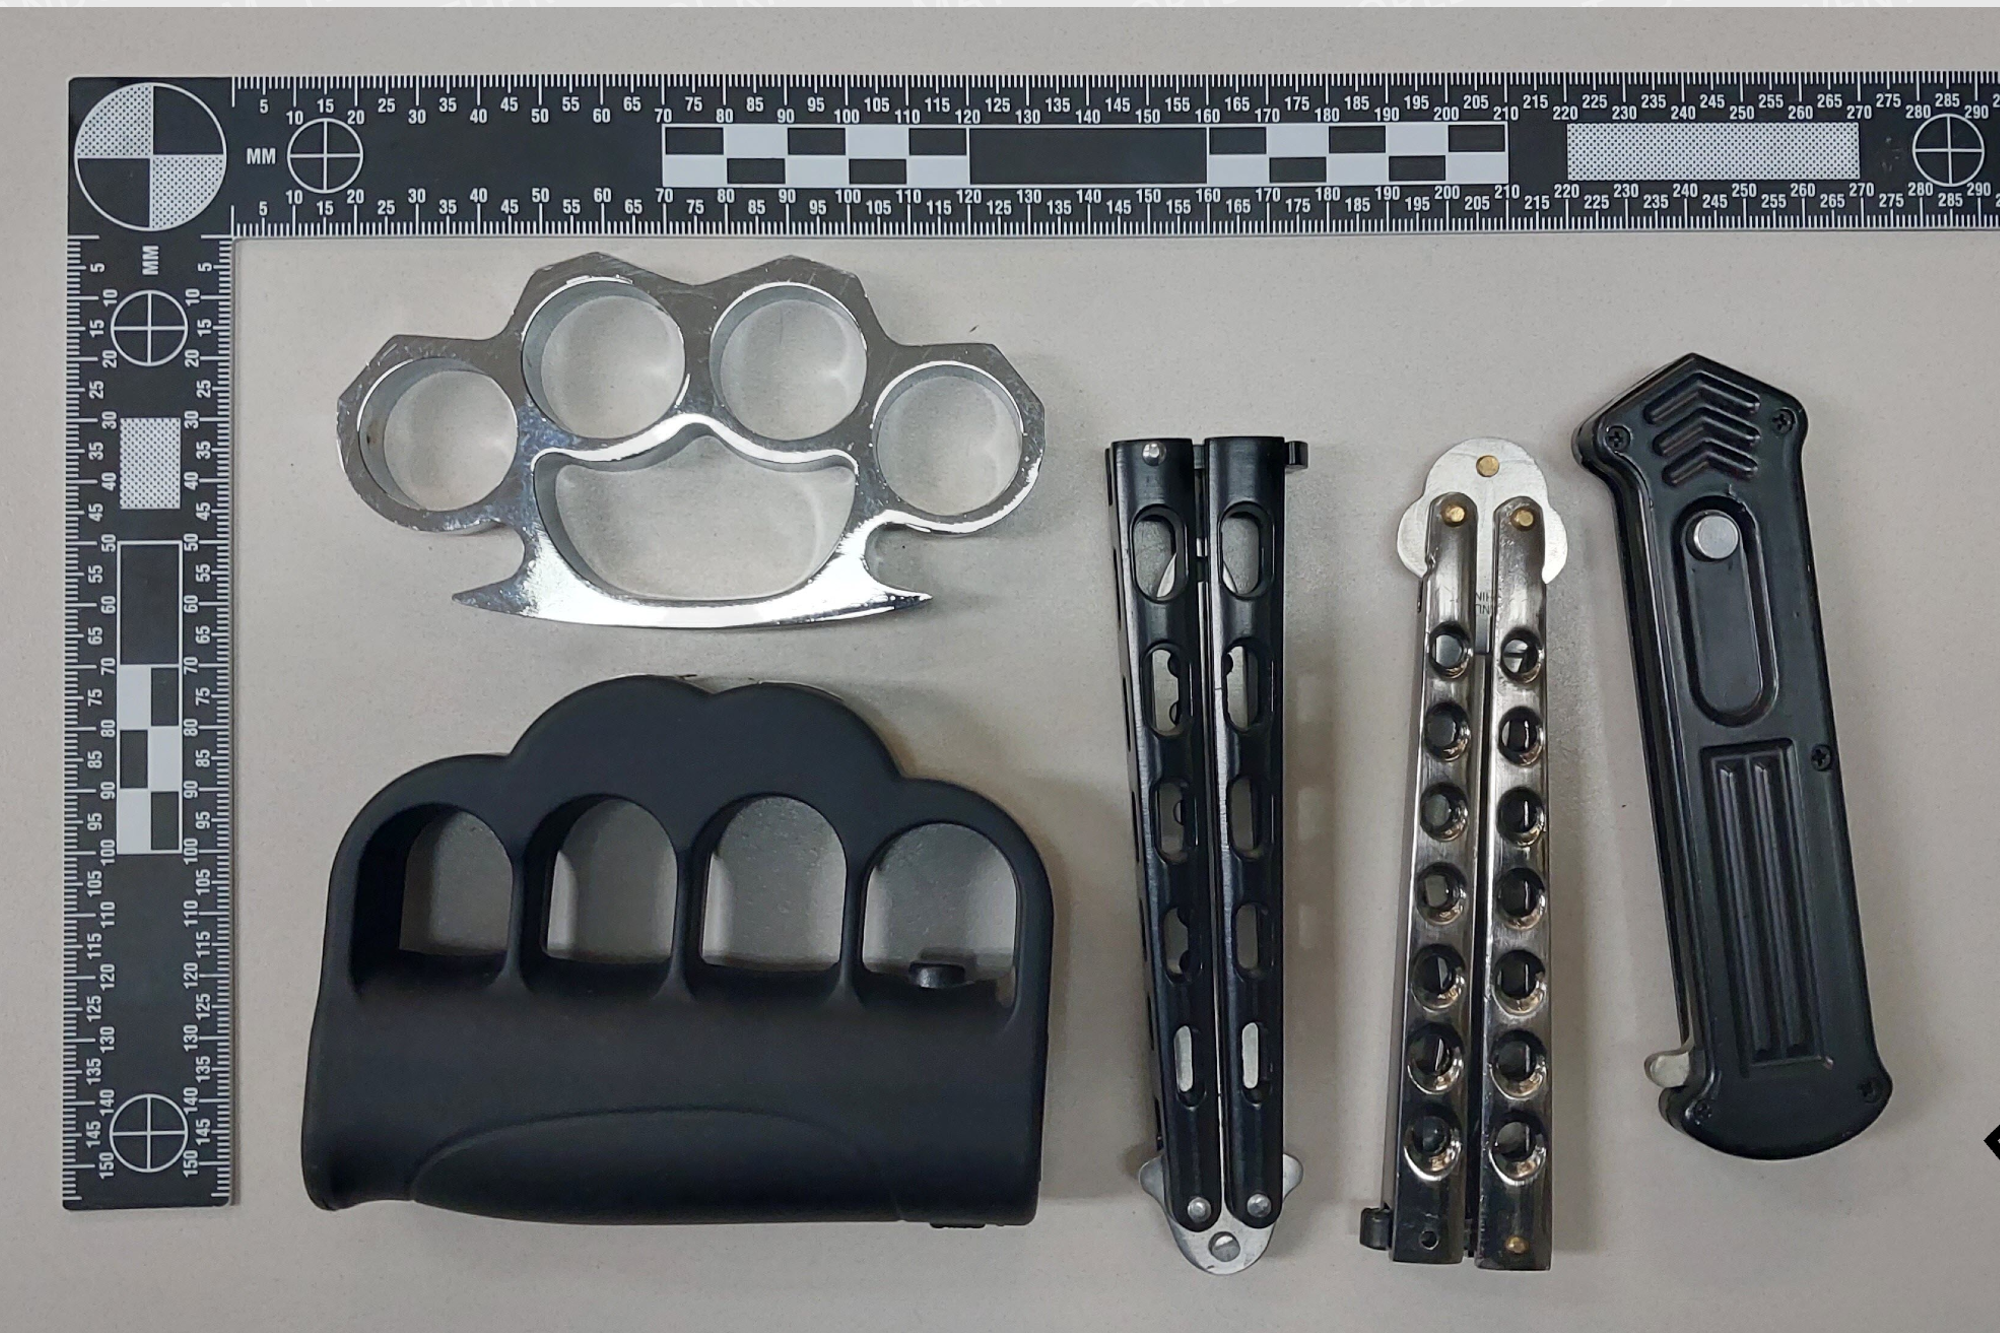 Electrified brass knuckles among banned weapons seized in Cochrane